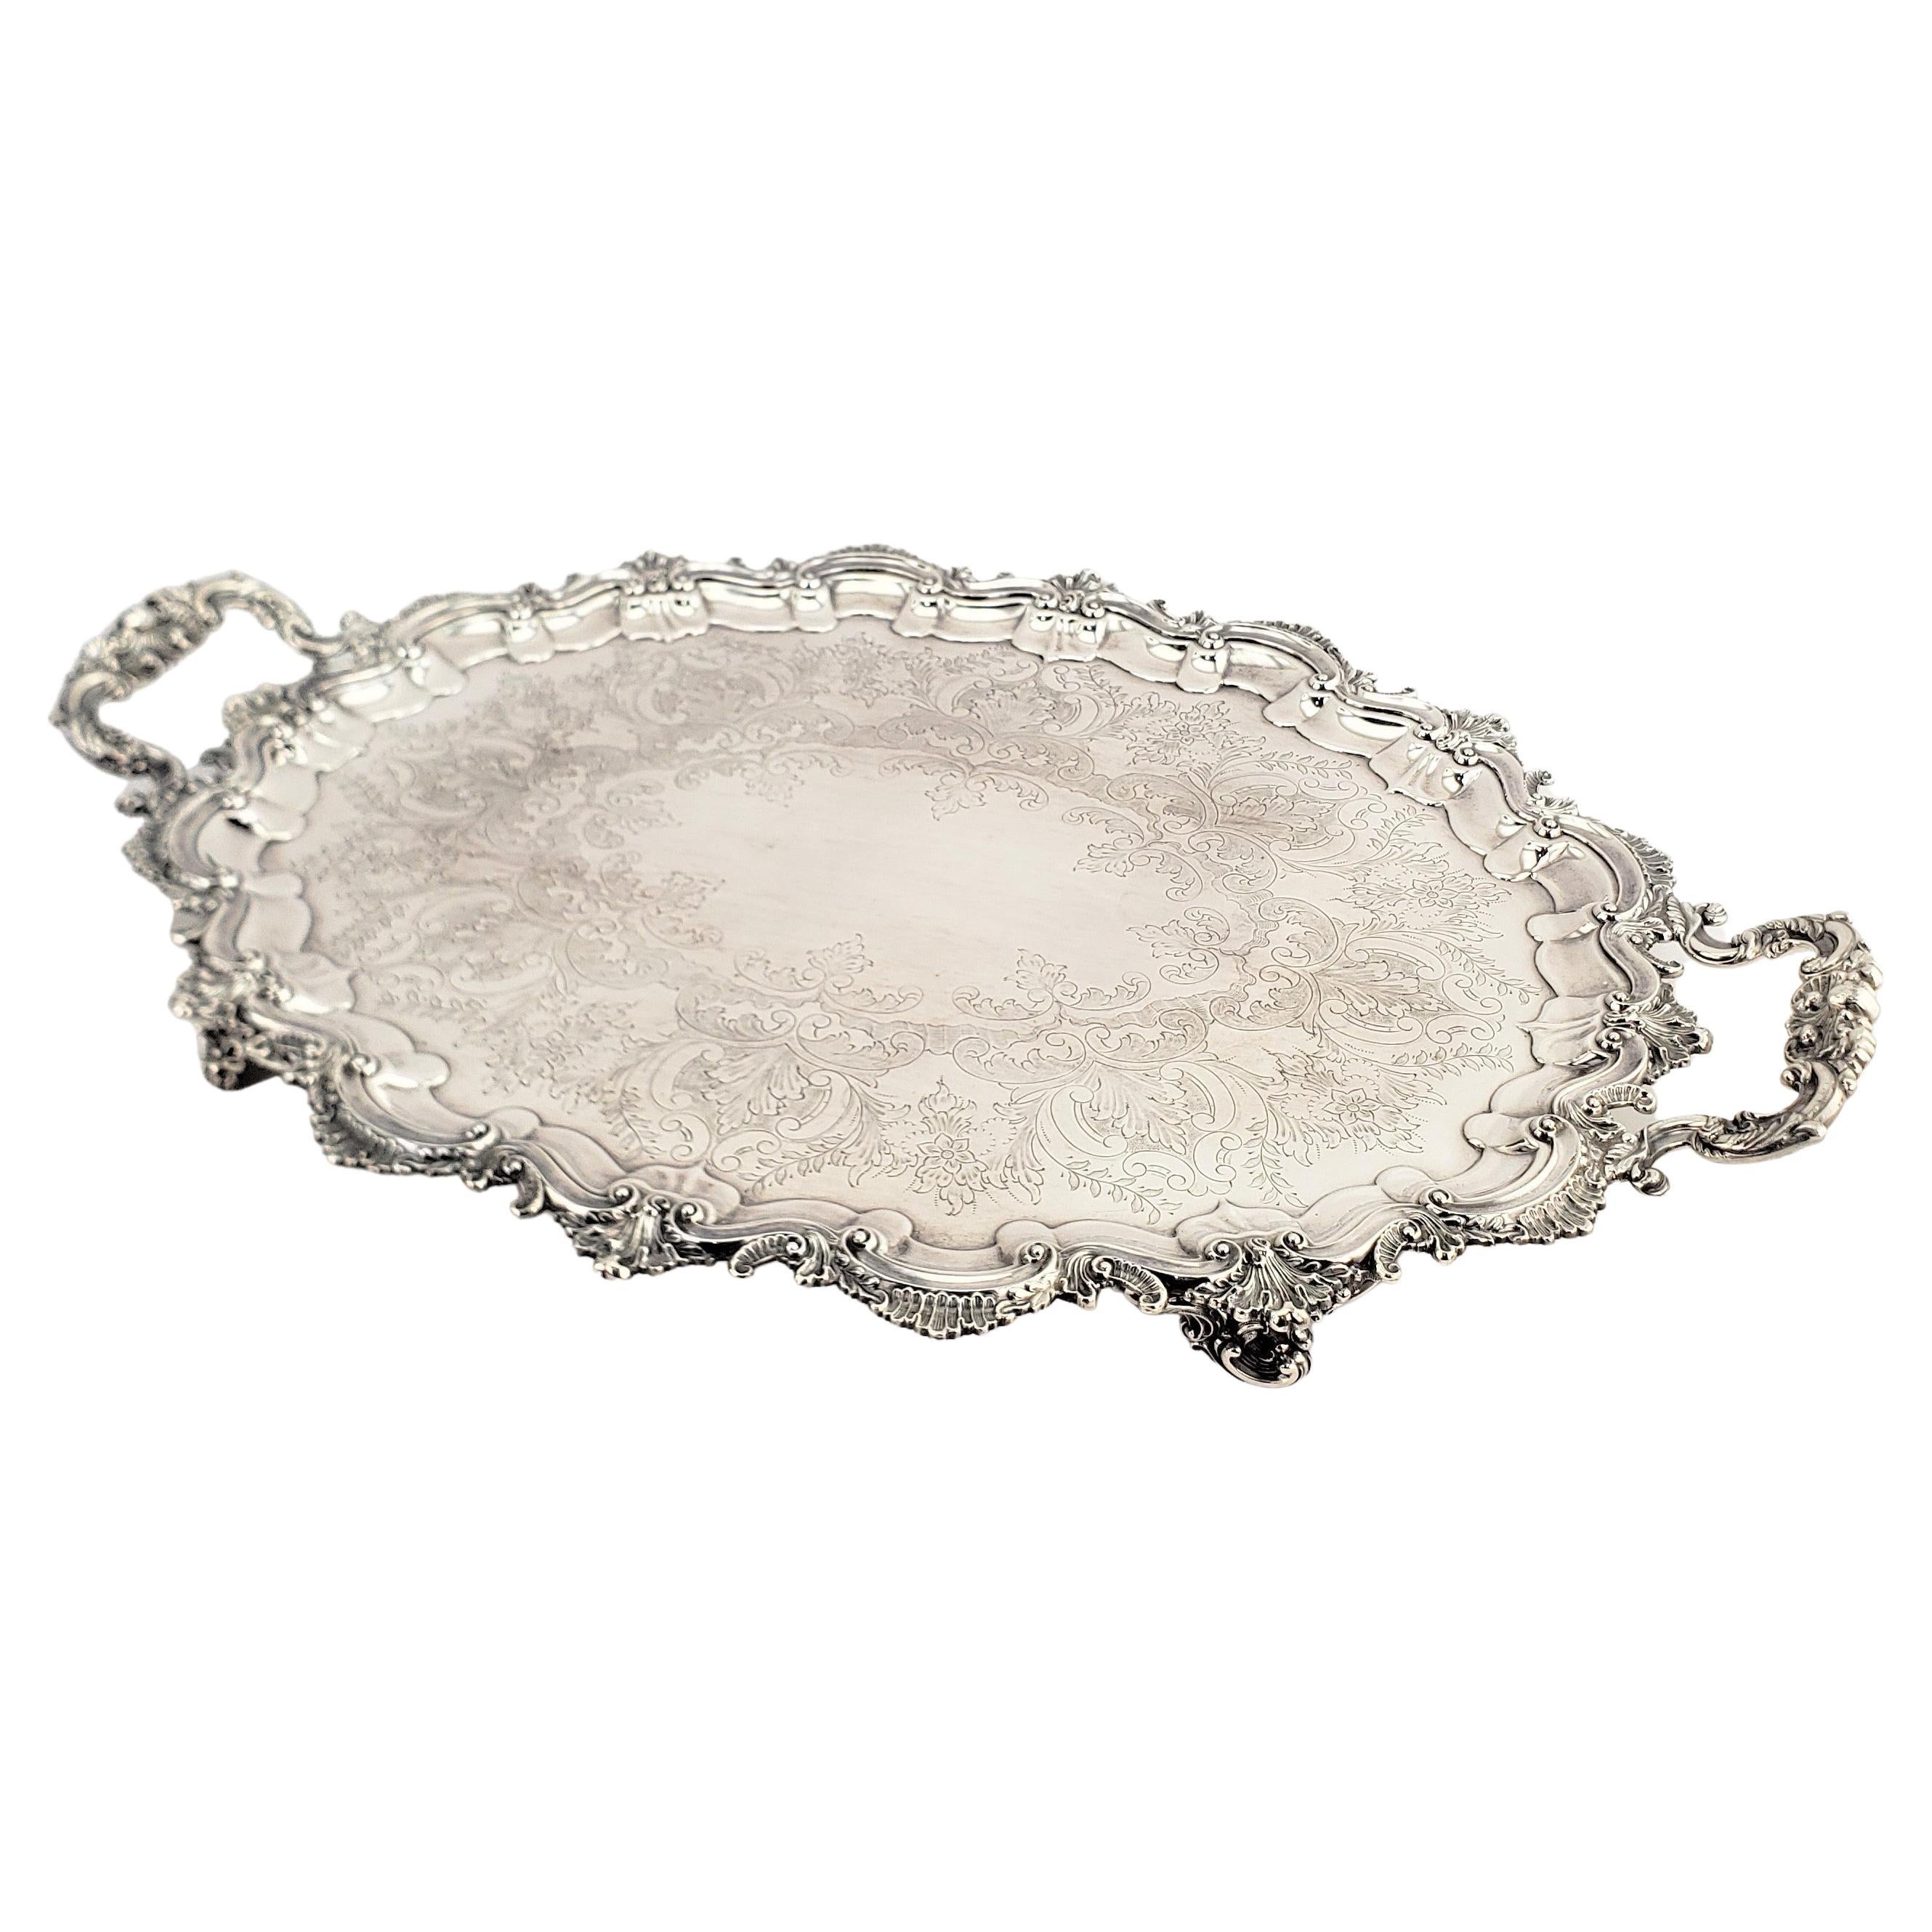 Large Antique English Footed Silver Plated Serving Tray with Floral Decoration For Sale